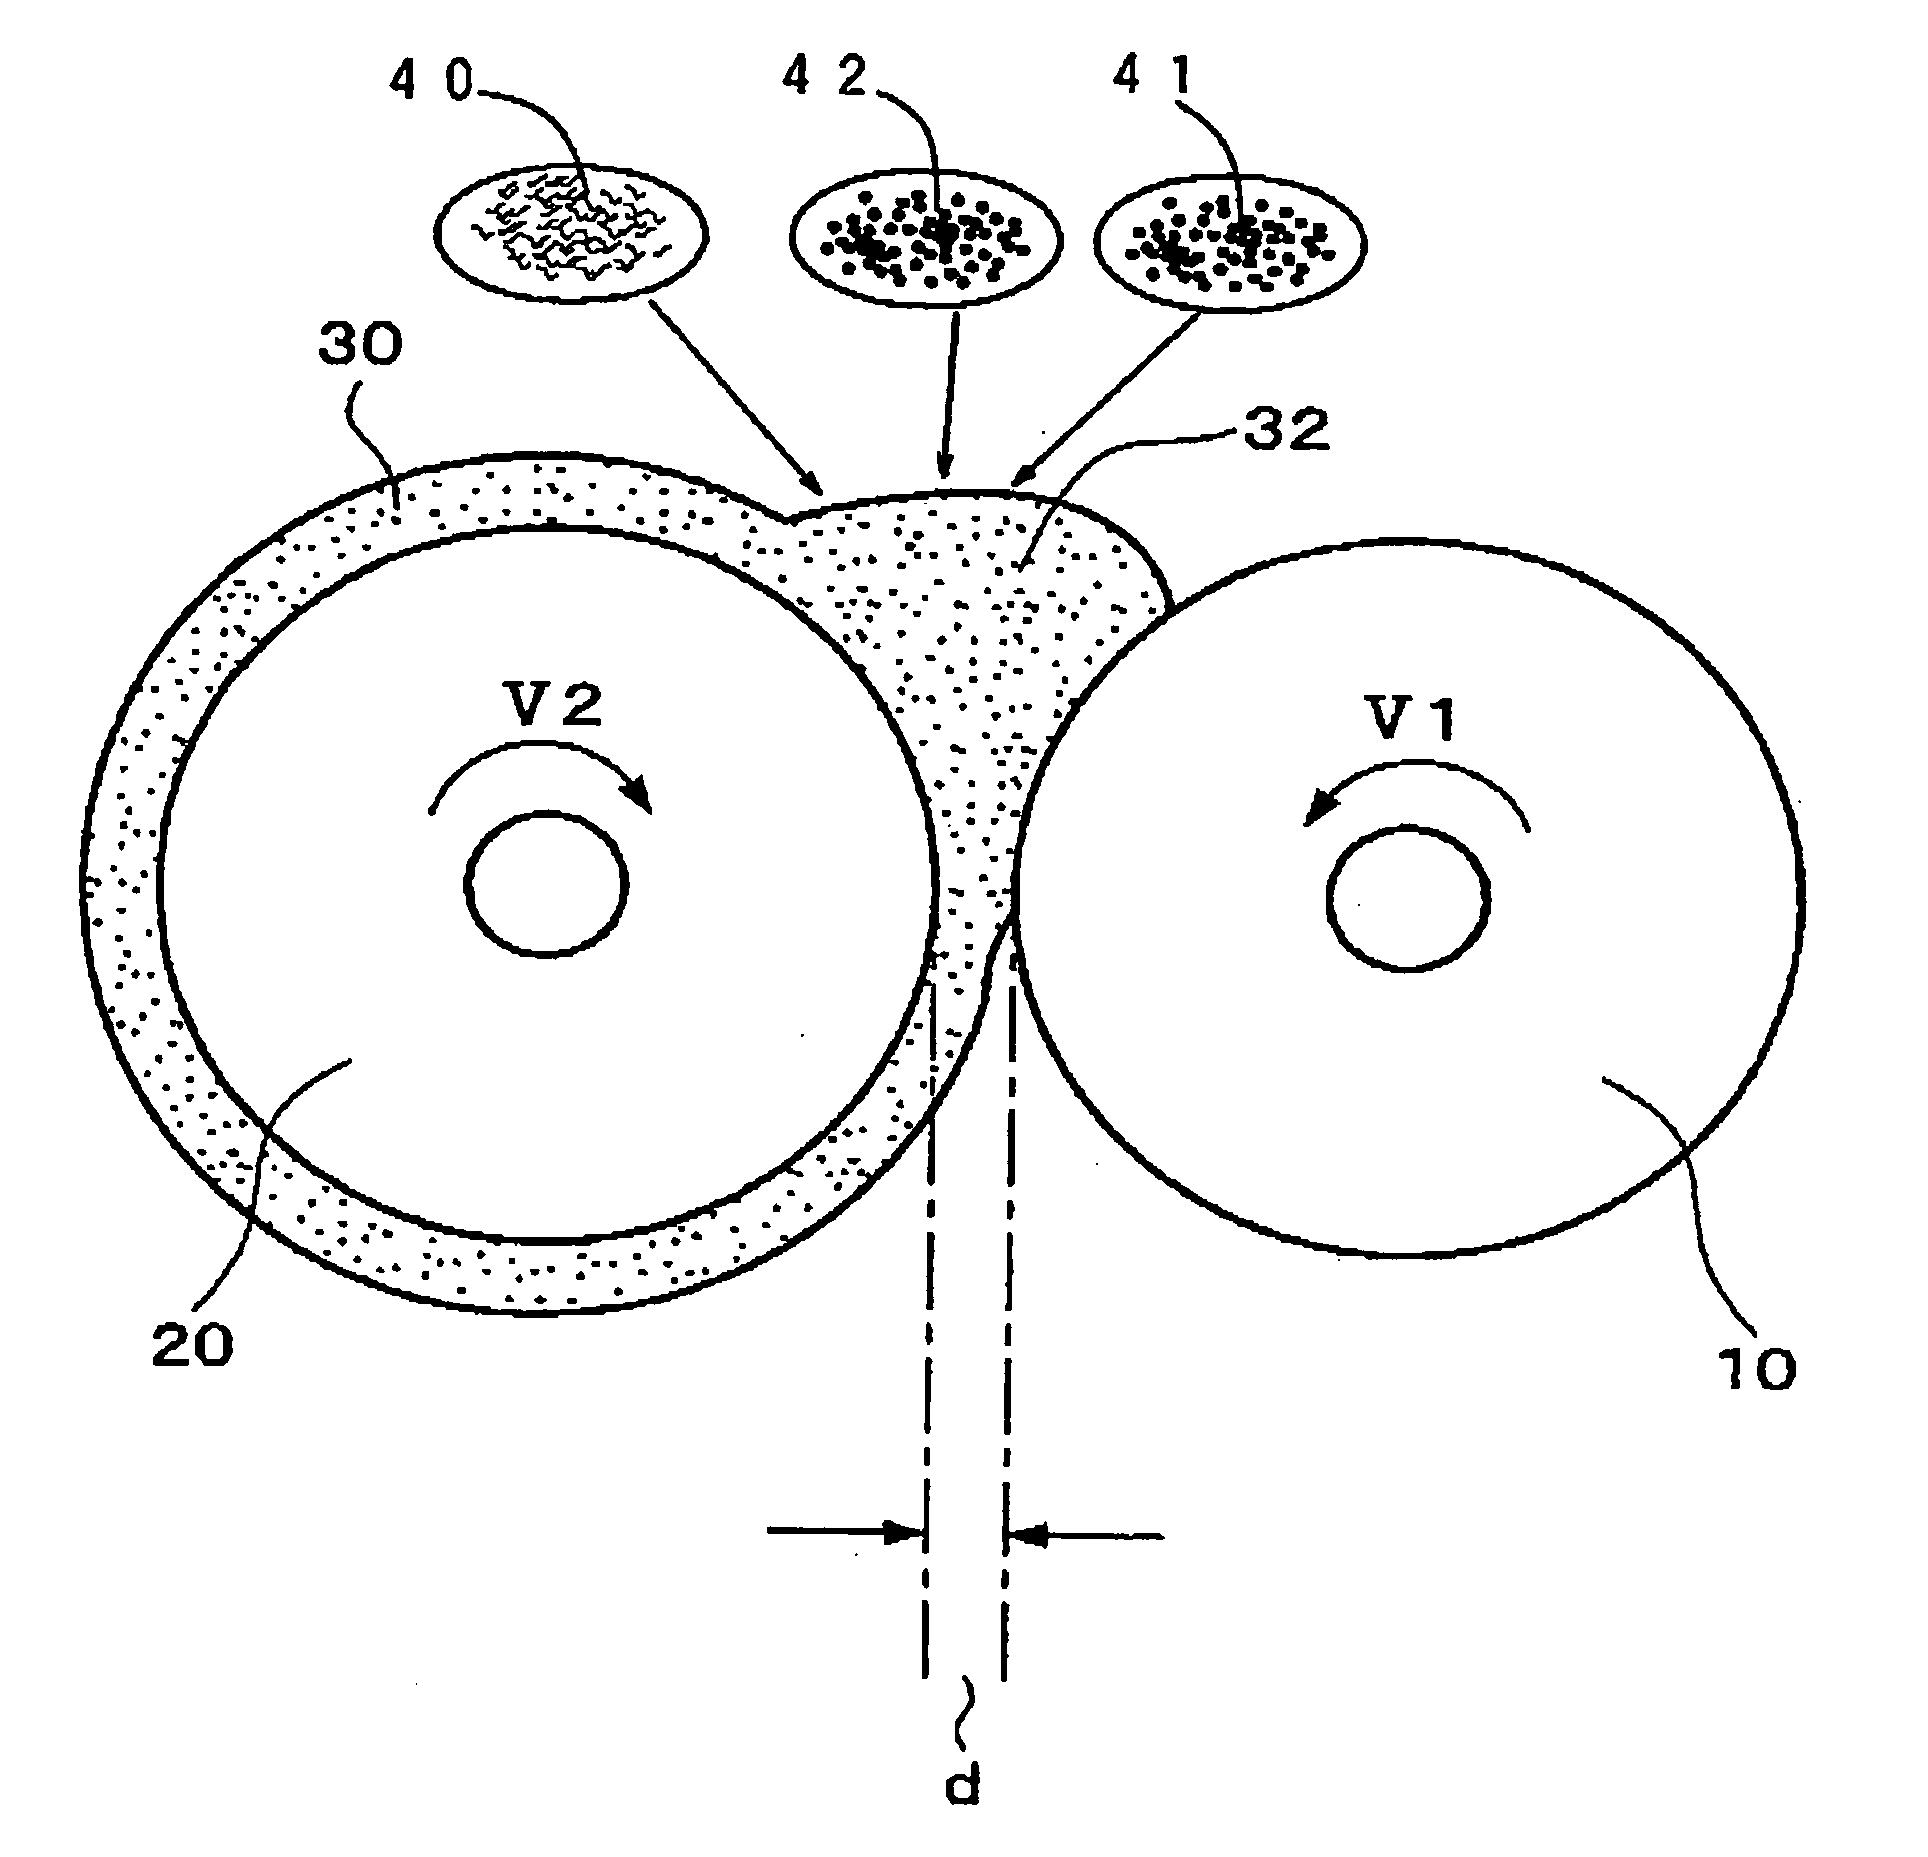 Composite metal material and method of producing the same, caliper body, bracket, disk rotor, drum, and knuckle